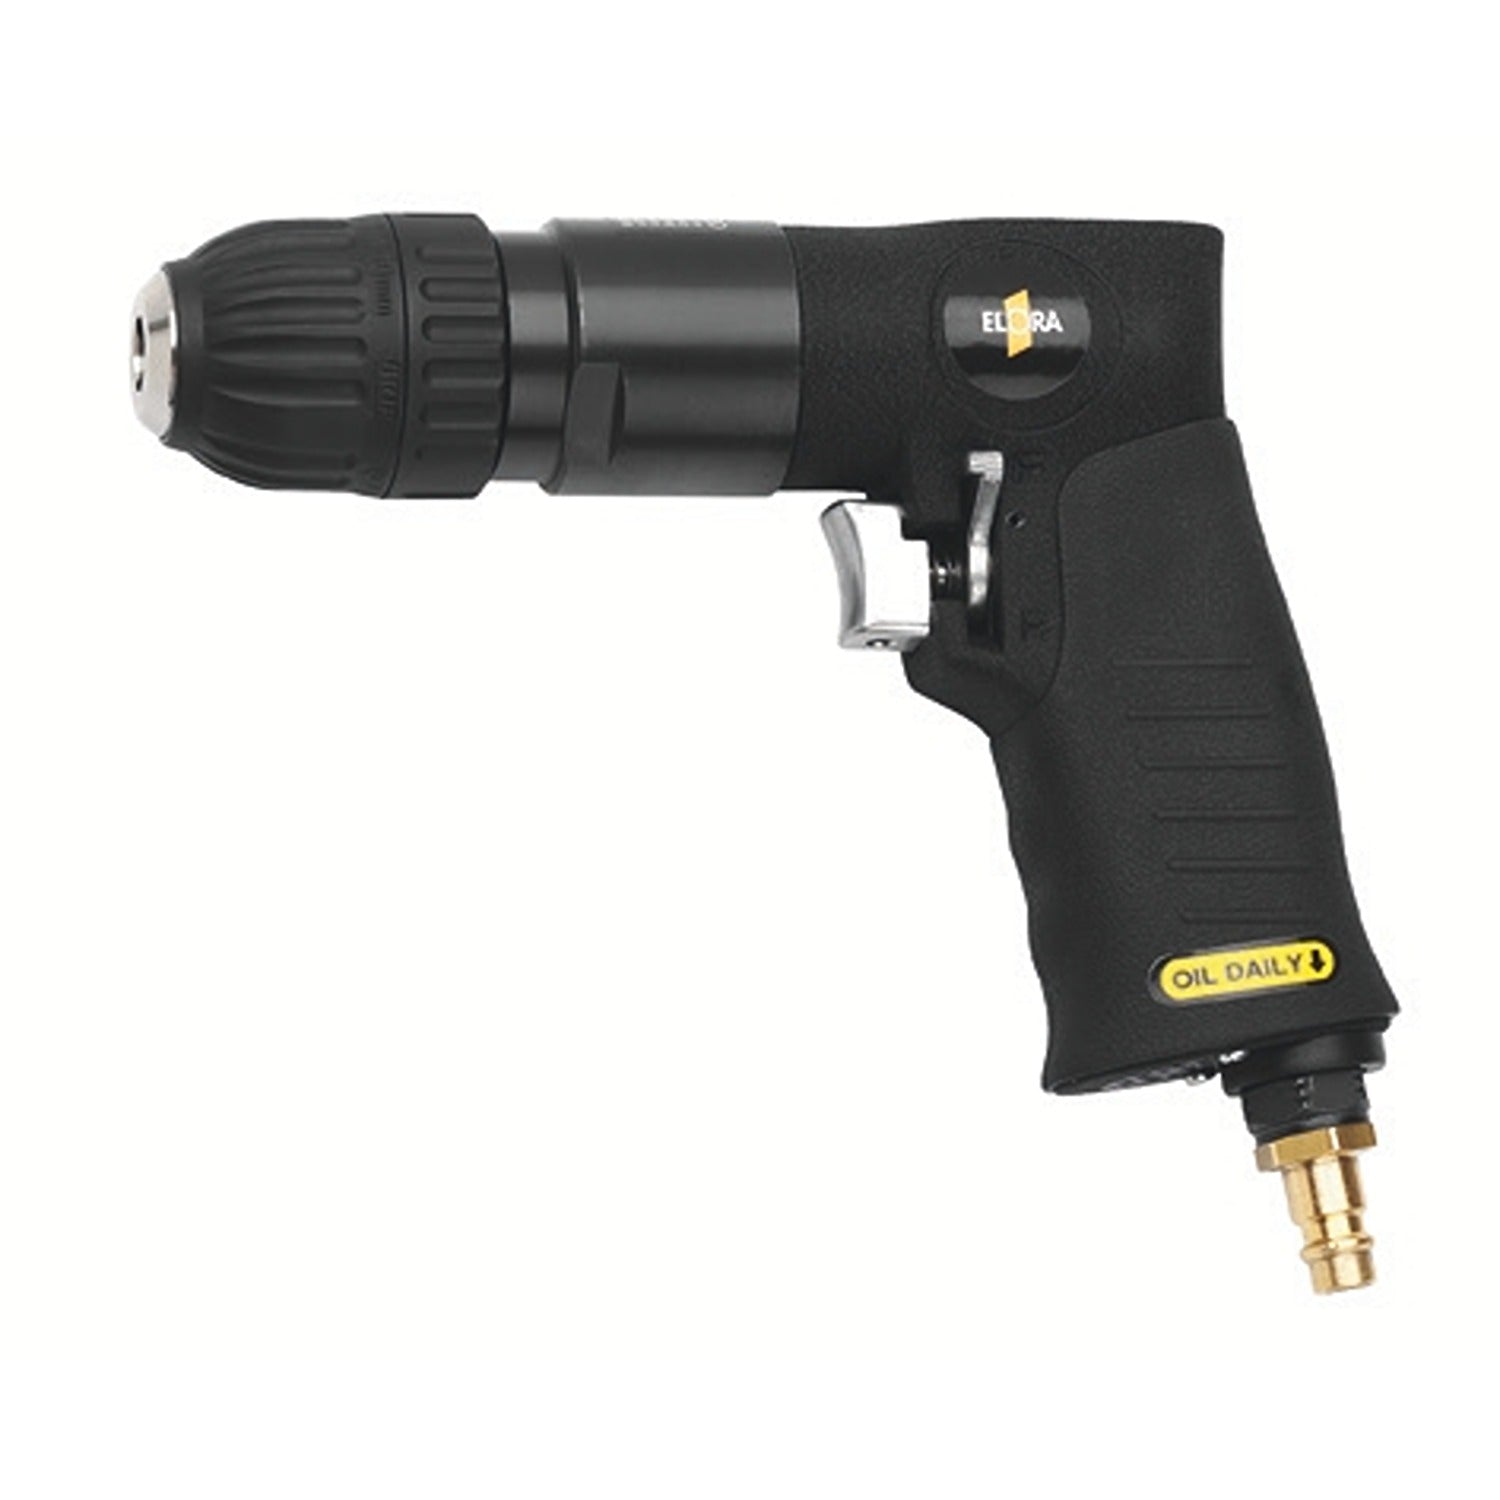 ELORA 5006 Pneumatic Drill, Reversible Clamping Up To 10mm - Premium Pneumatic Drill from ELORA - Shop now at Yew Aik.